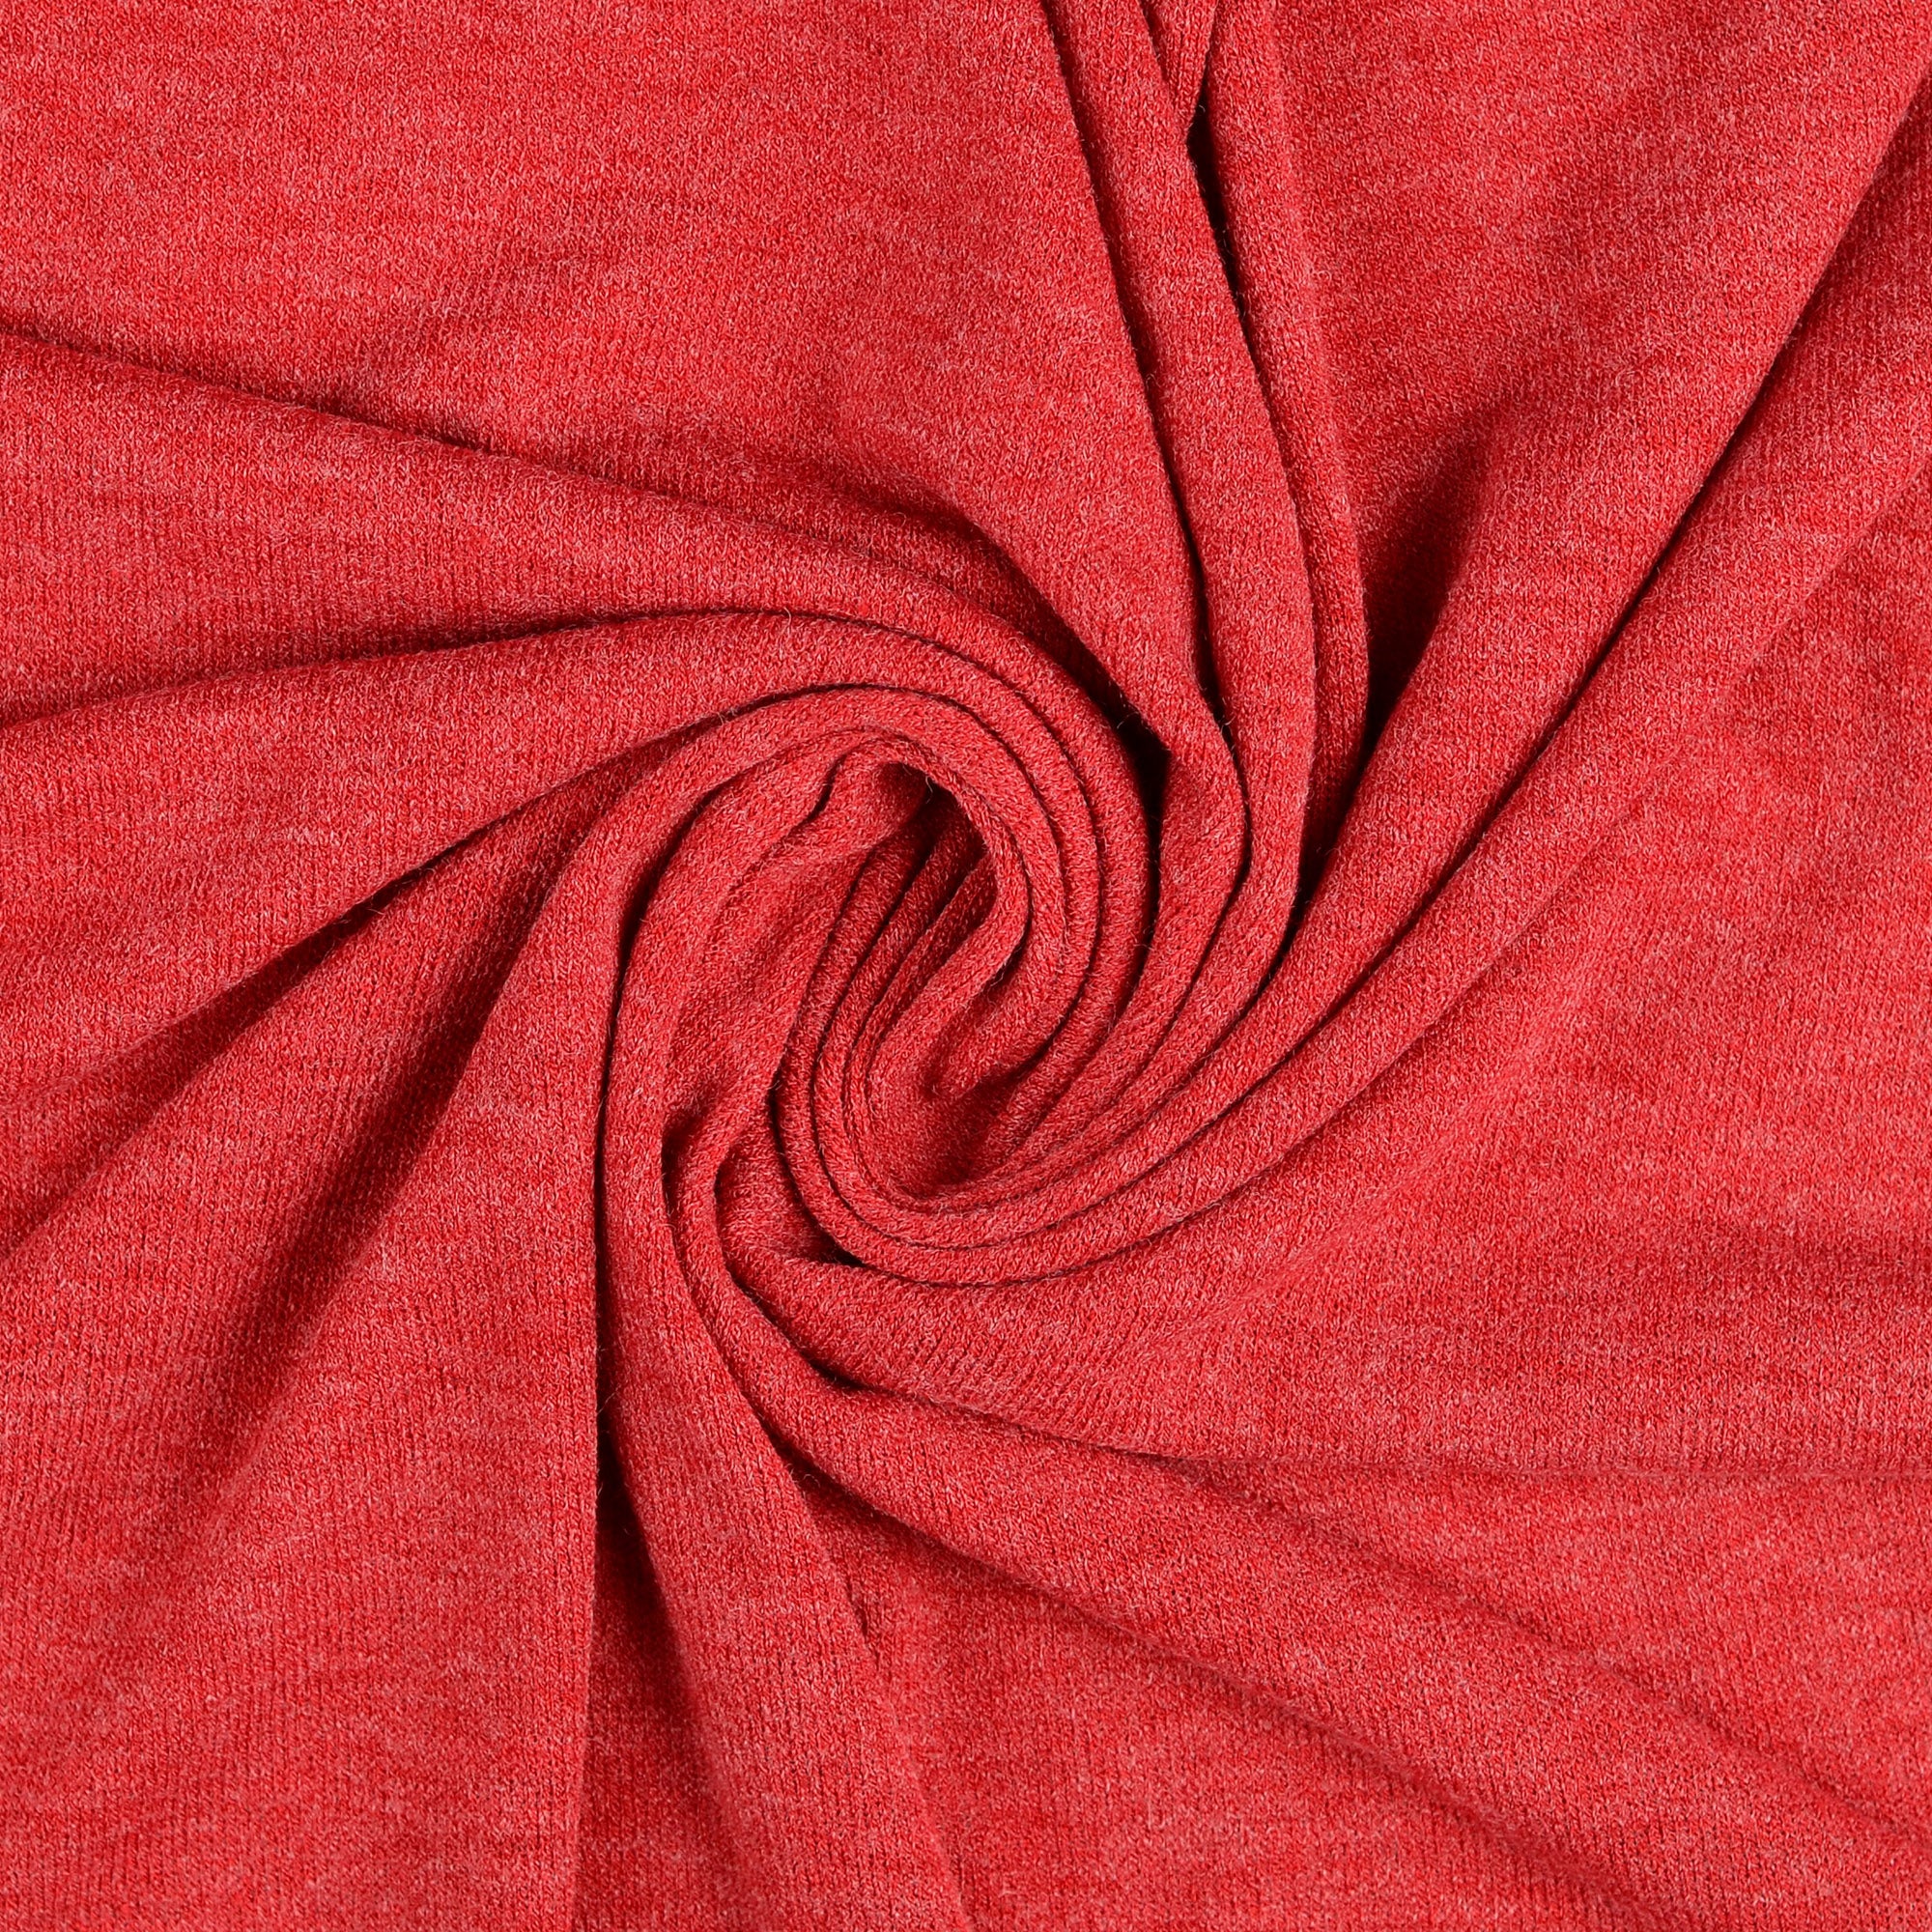 REMNANT 0.48 Metre - Comfy Viscose Blend Sweater Knit in Red